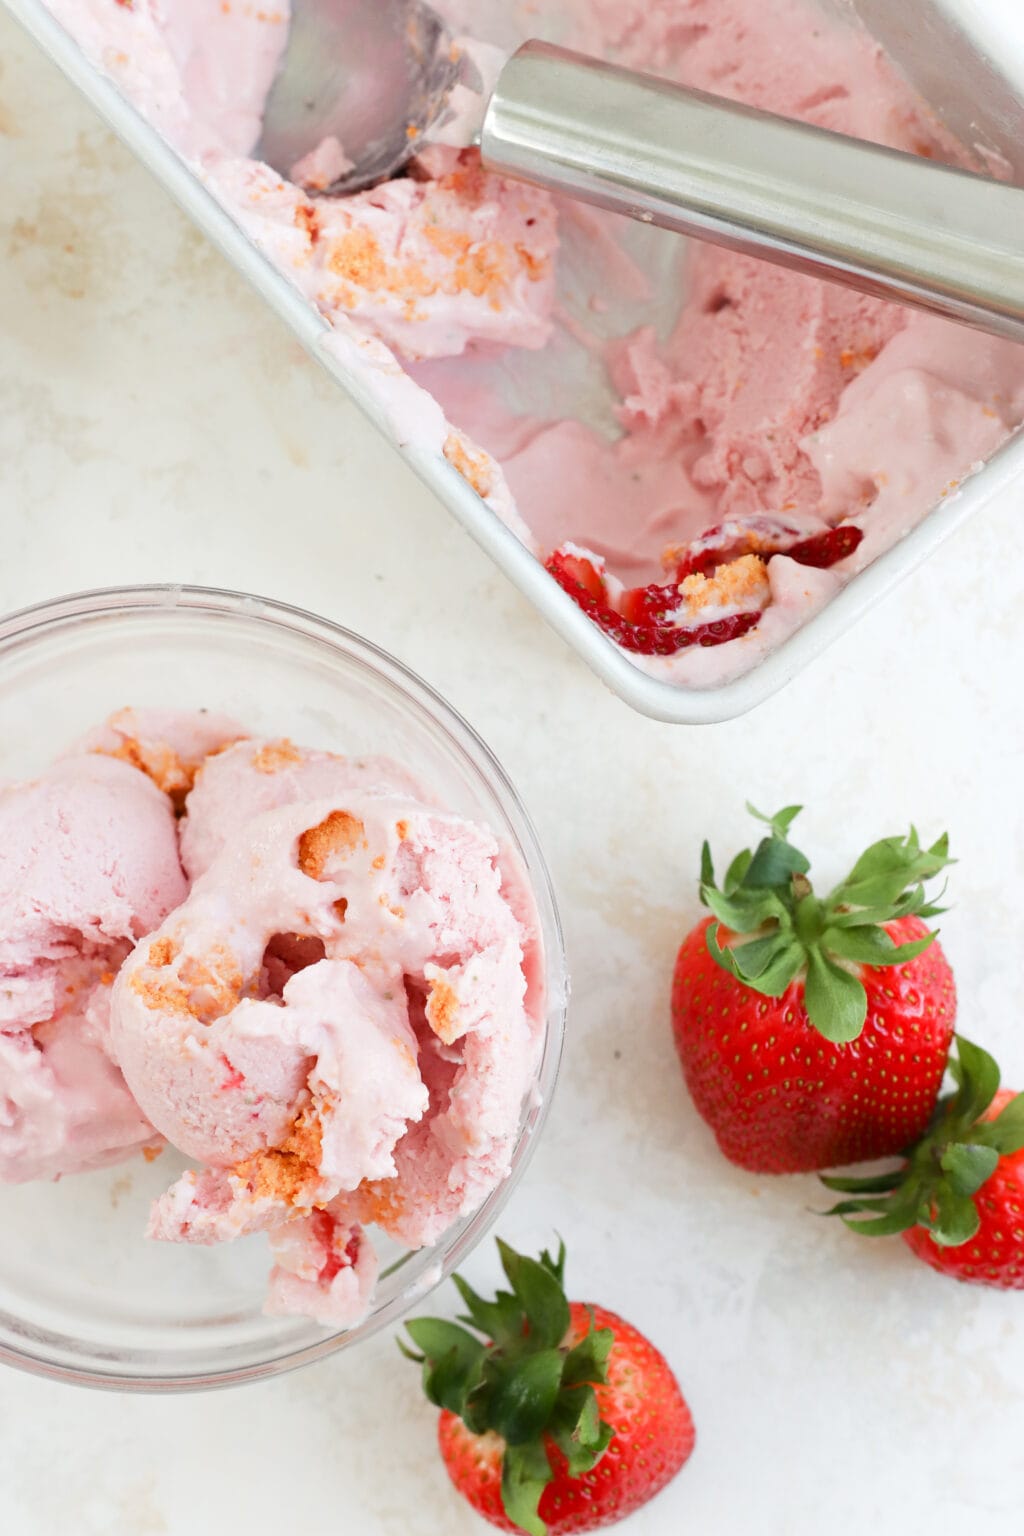 An overhead photo of pink ice cream in a bowl and in a loaf pan. There are two scoops of ice cream in a bowl, two strawberries on the countertop, and a loaf pan with a few scoops taken out of it. 